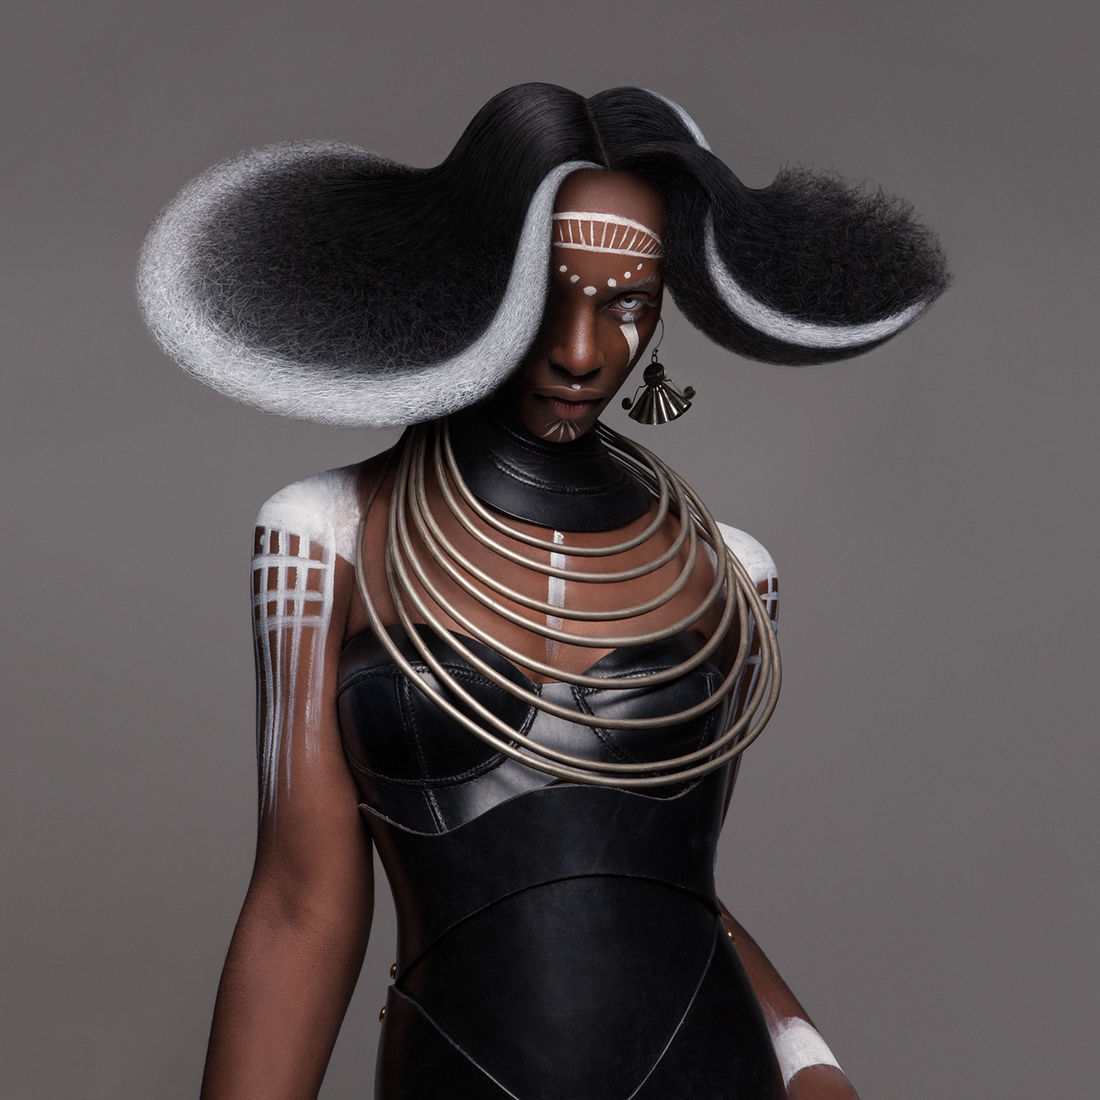 British Hair Awards 2016 - Afro Finalist Collection on Behance